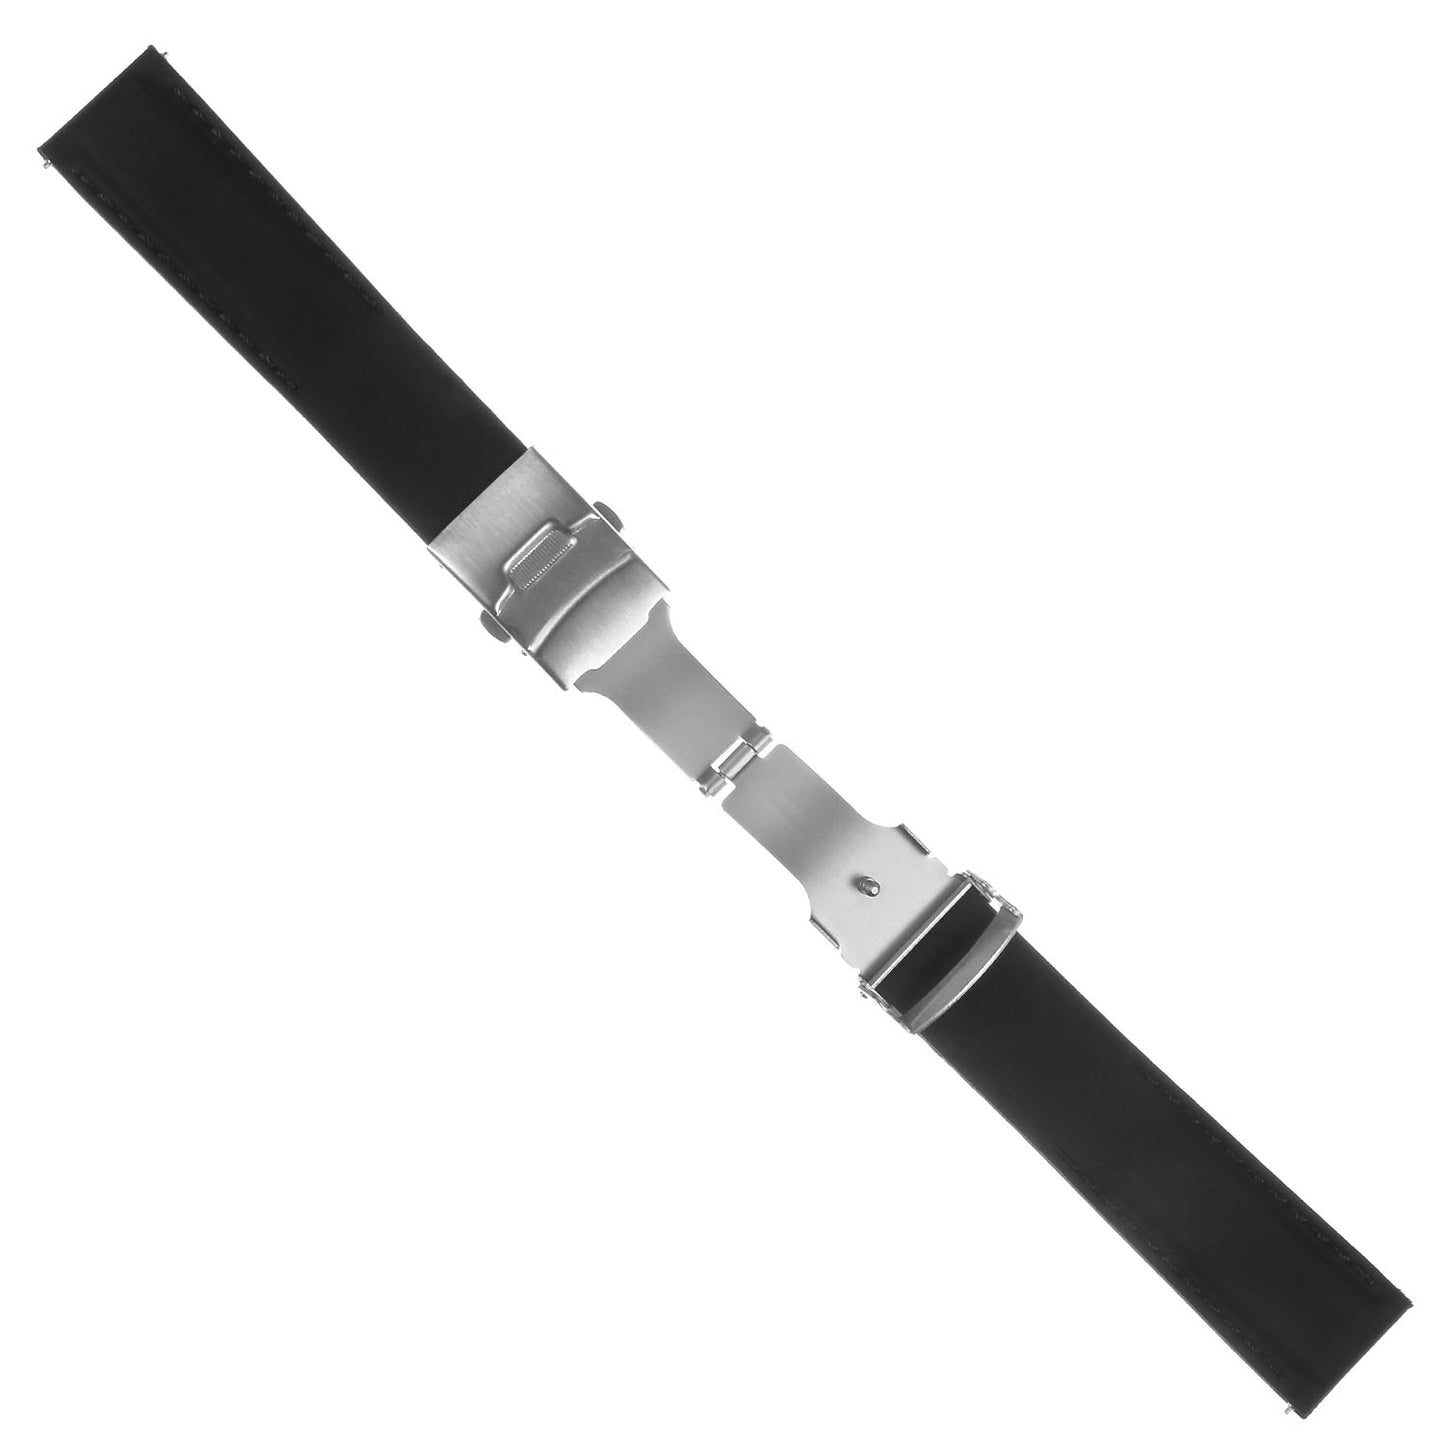 Rubber Strap with Deployant Clasp for Fossil Gen 5 Smartwatch